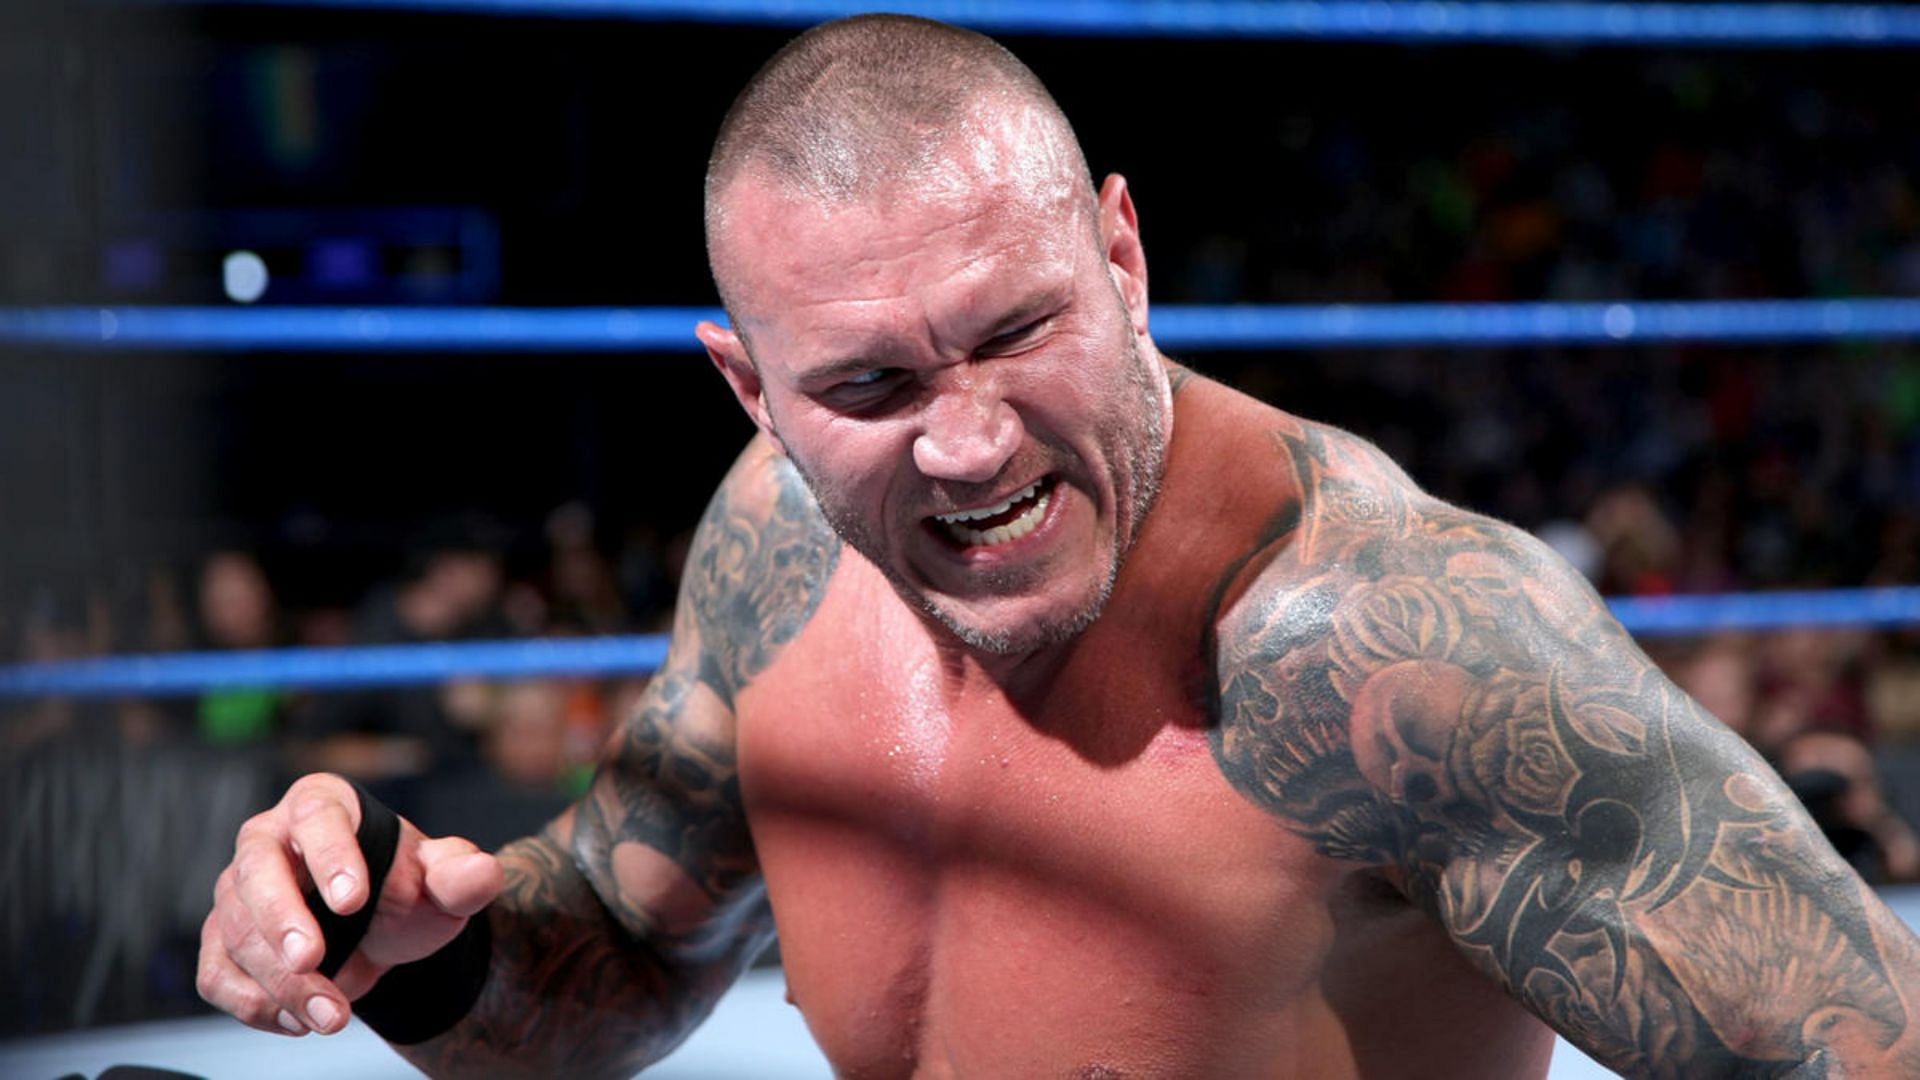 Randy Orton is now a WWE SmackDown Superstar